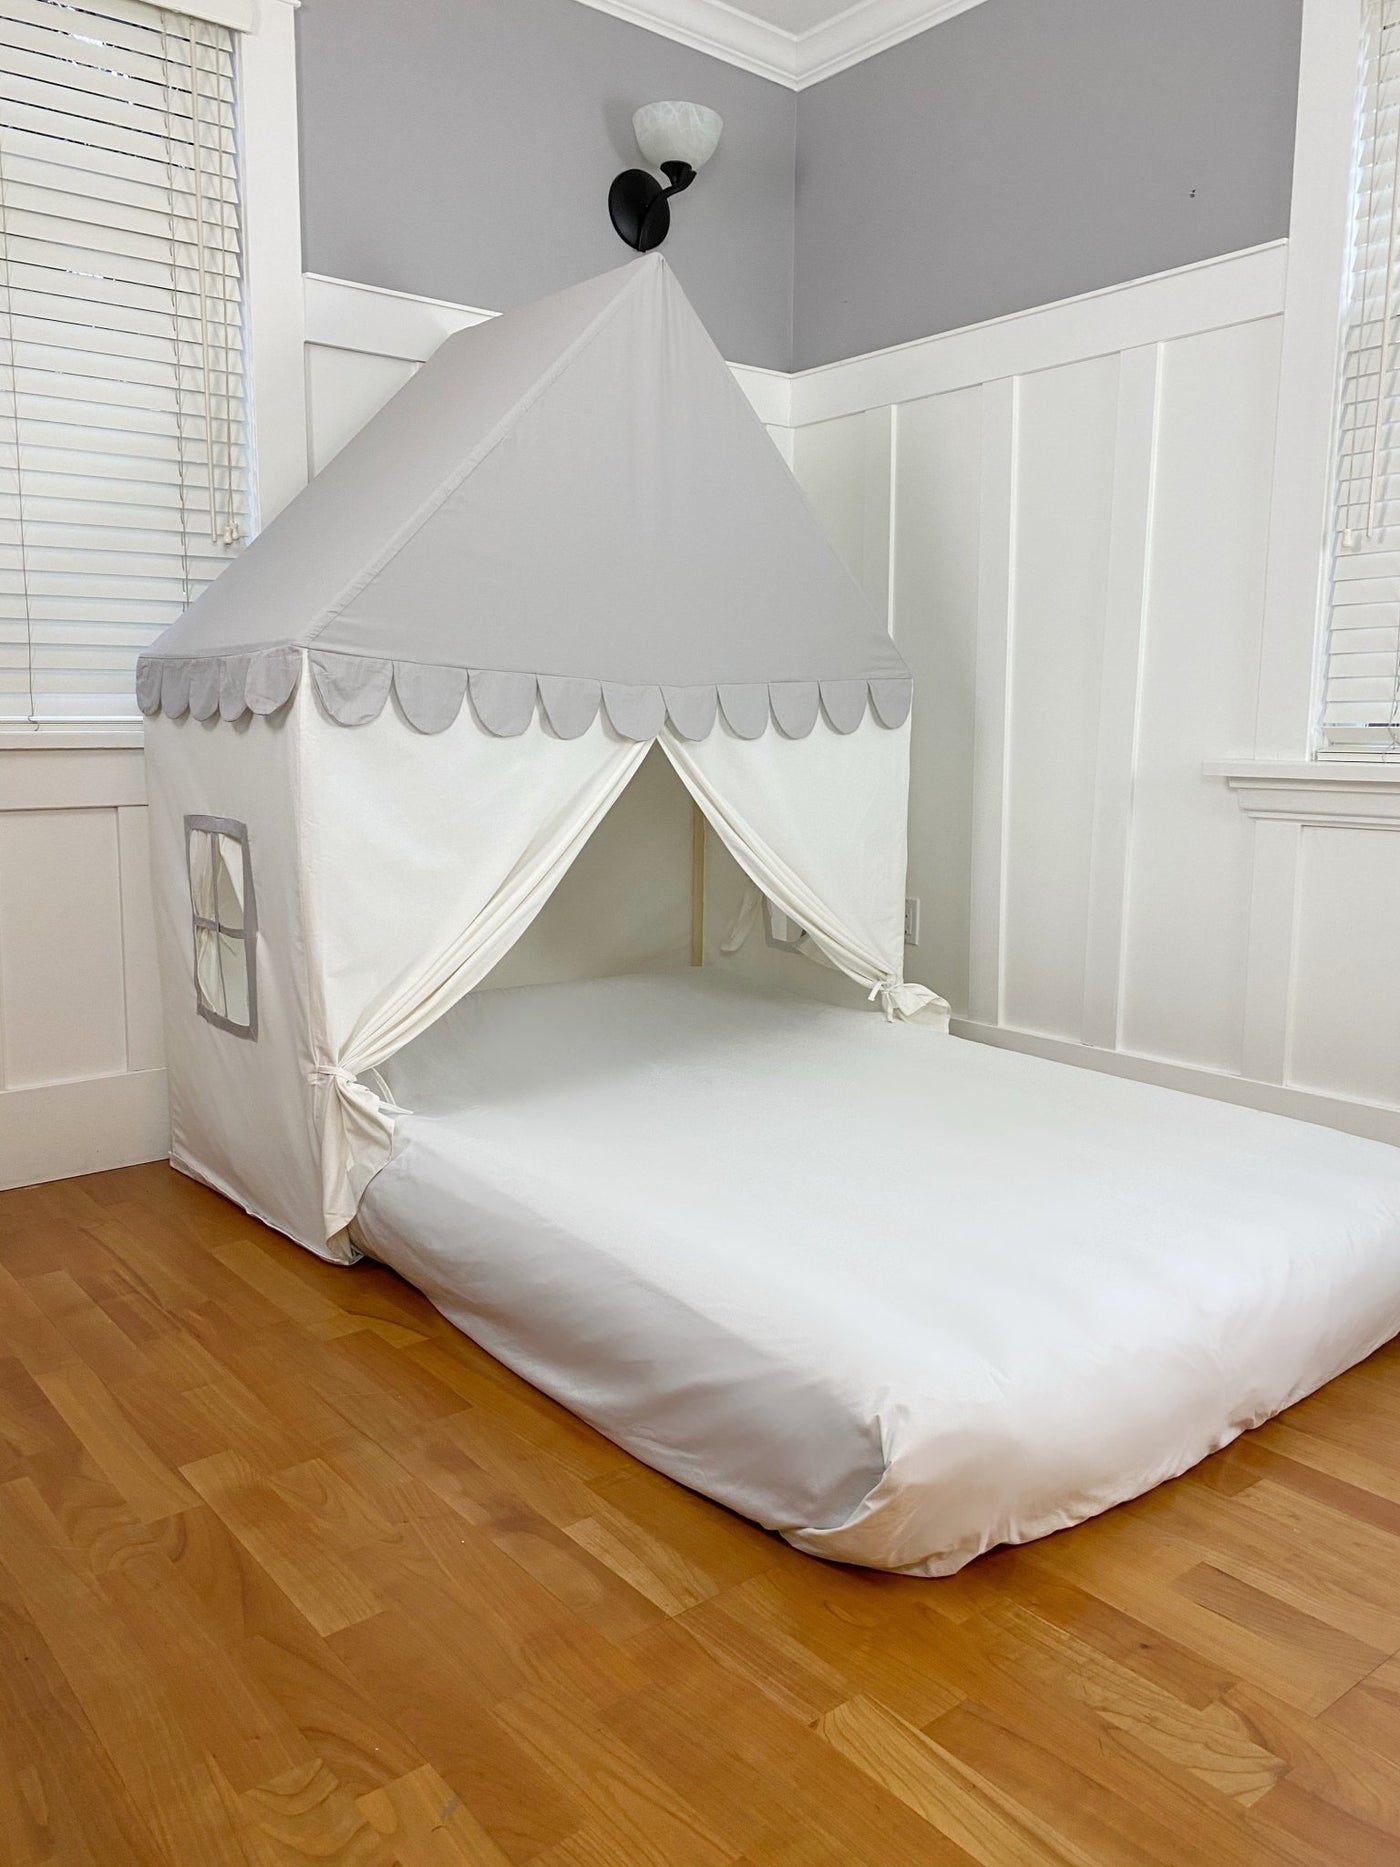 The 'Sweet Dreams' Play House Bed Canopy